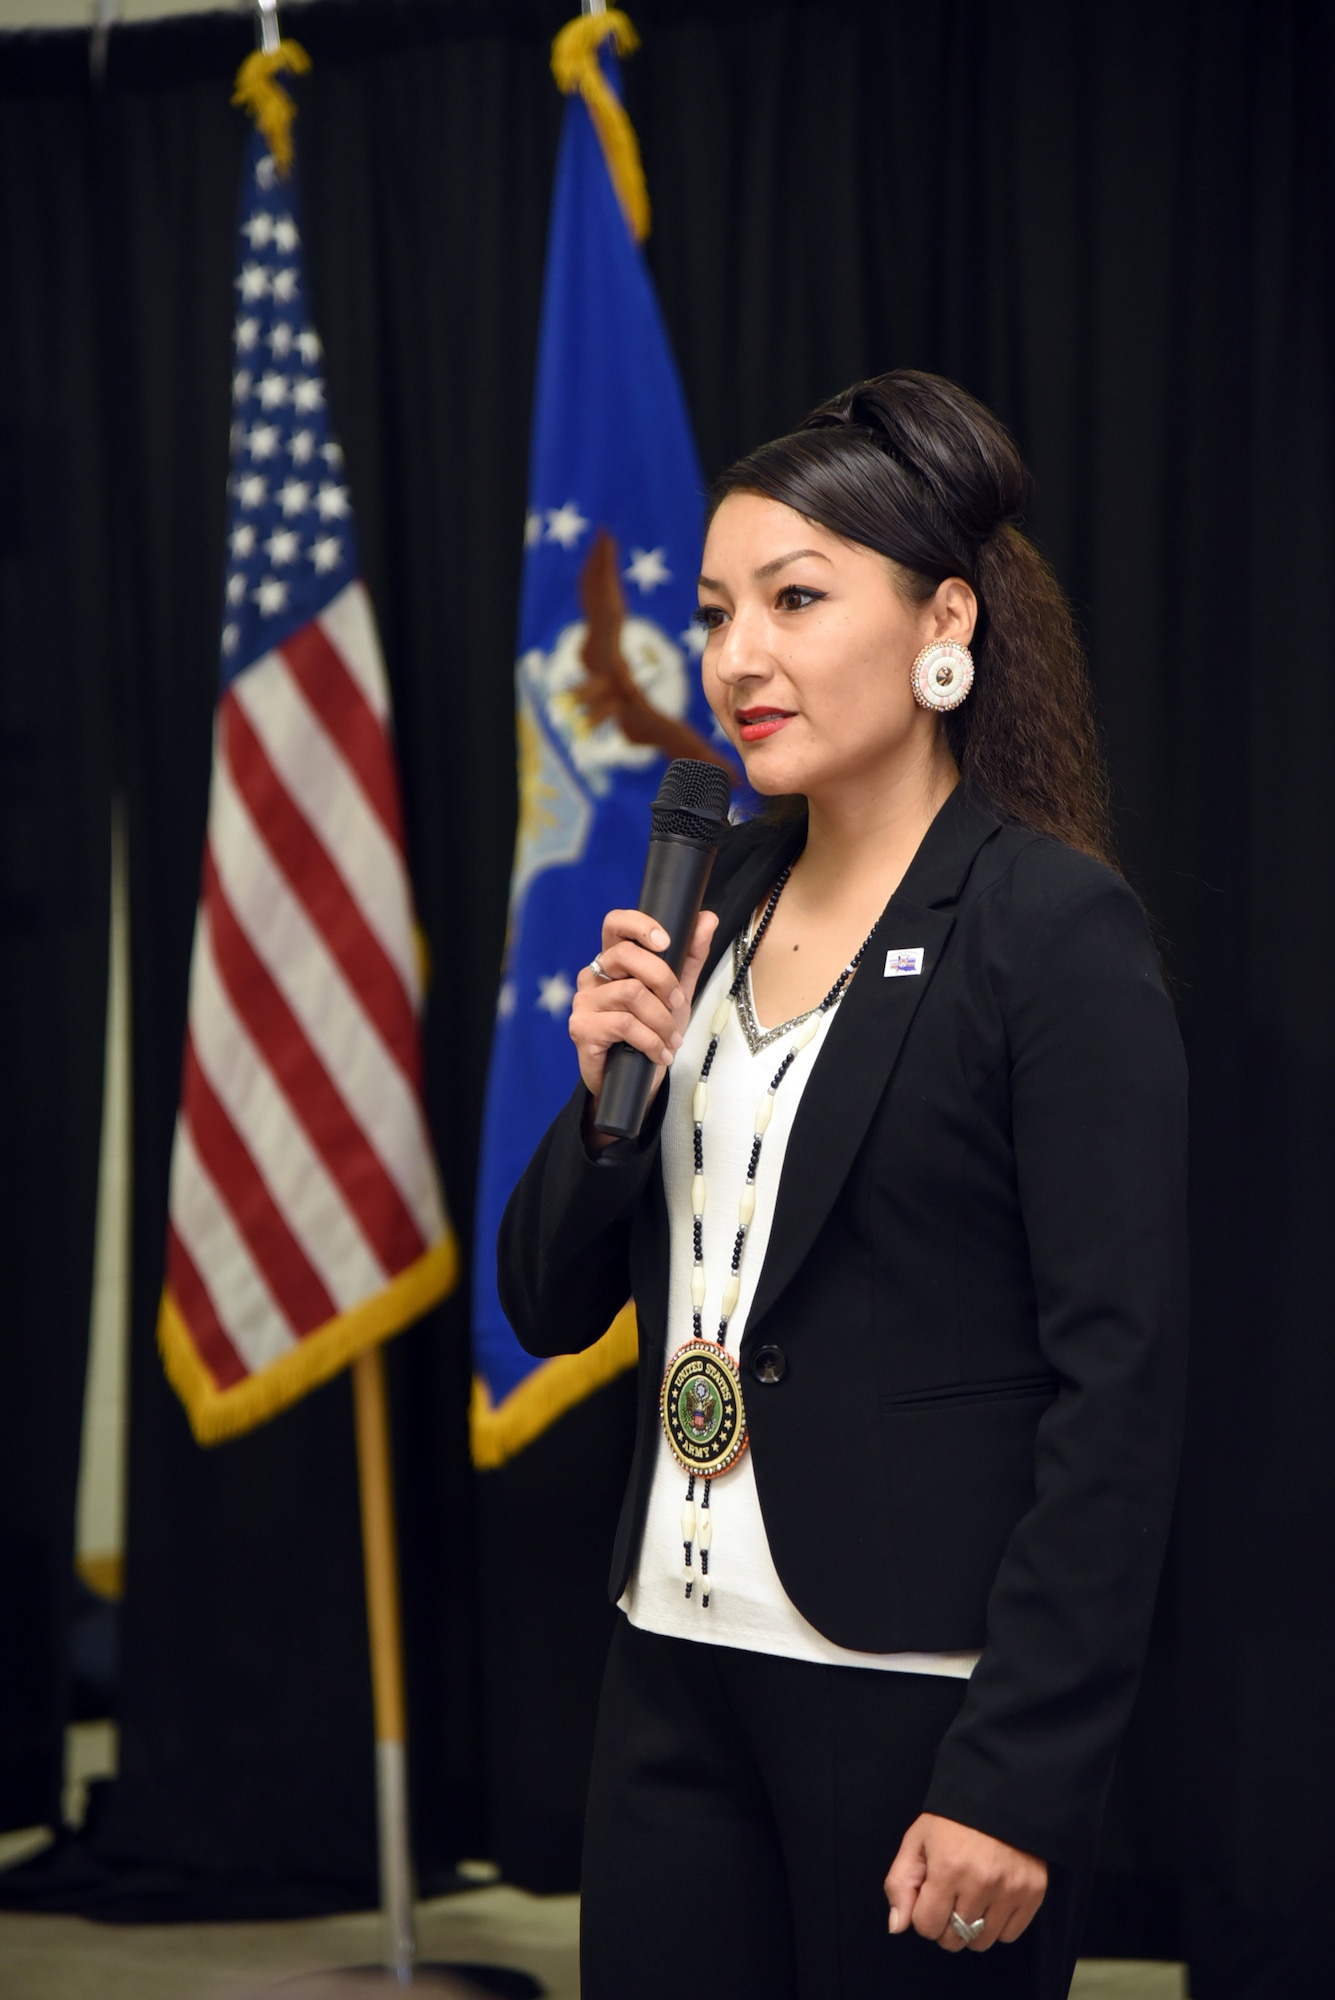 An image of guest speaker Lena Nells from the Tinker Inter-Tribal Council luncheon.